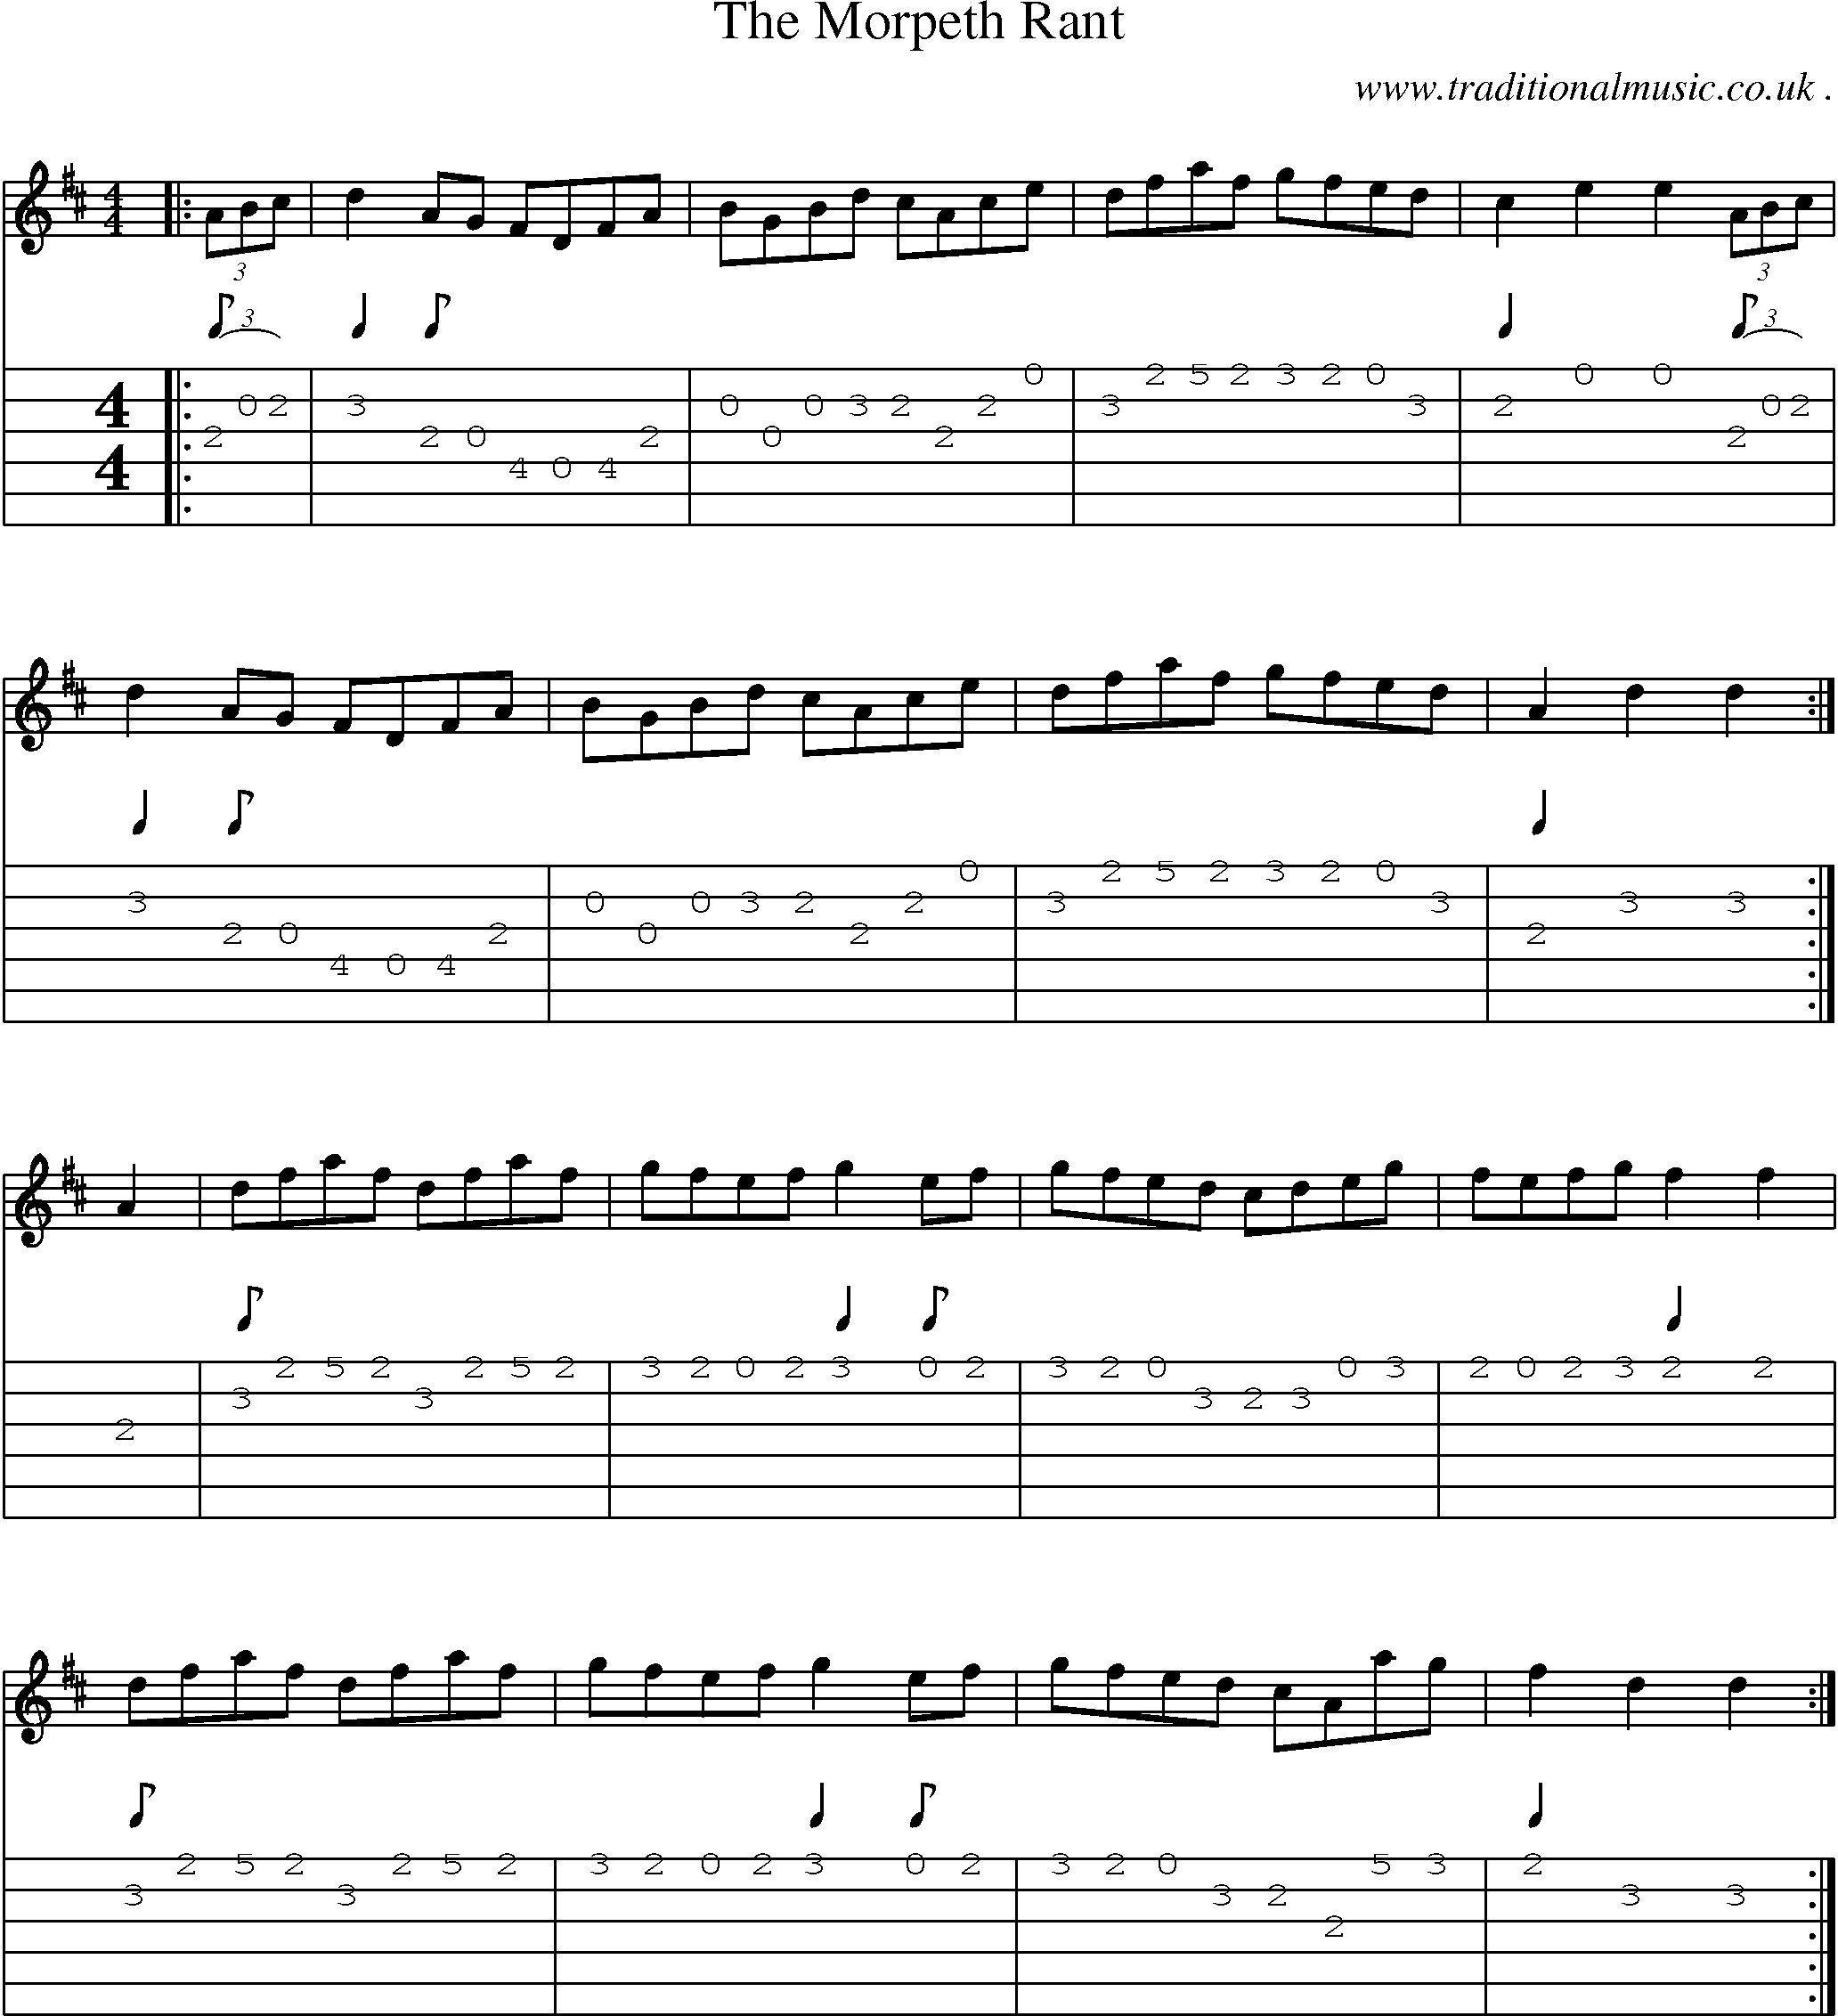 Sheet-Music and Guitar Tabs for The Morpeth Rant